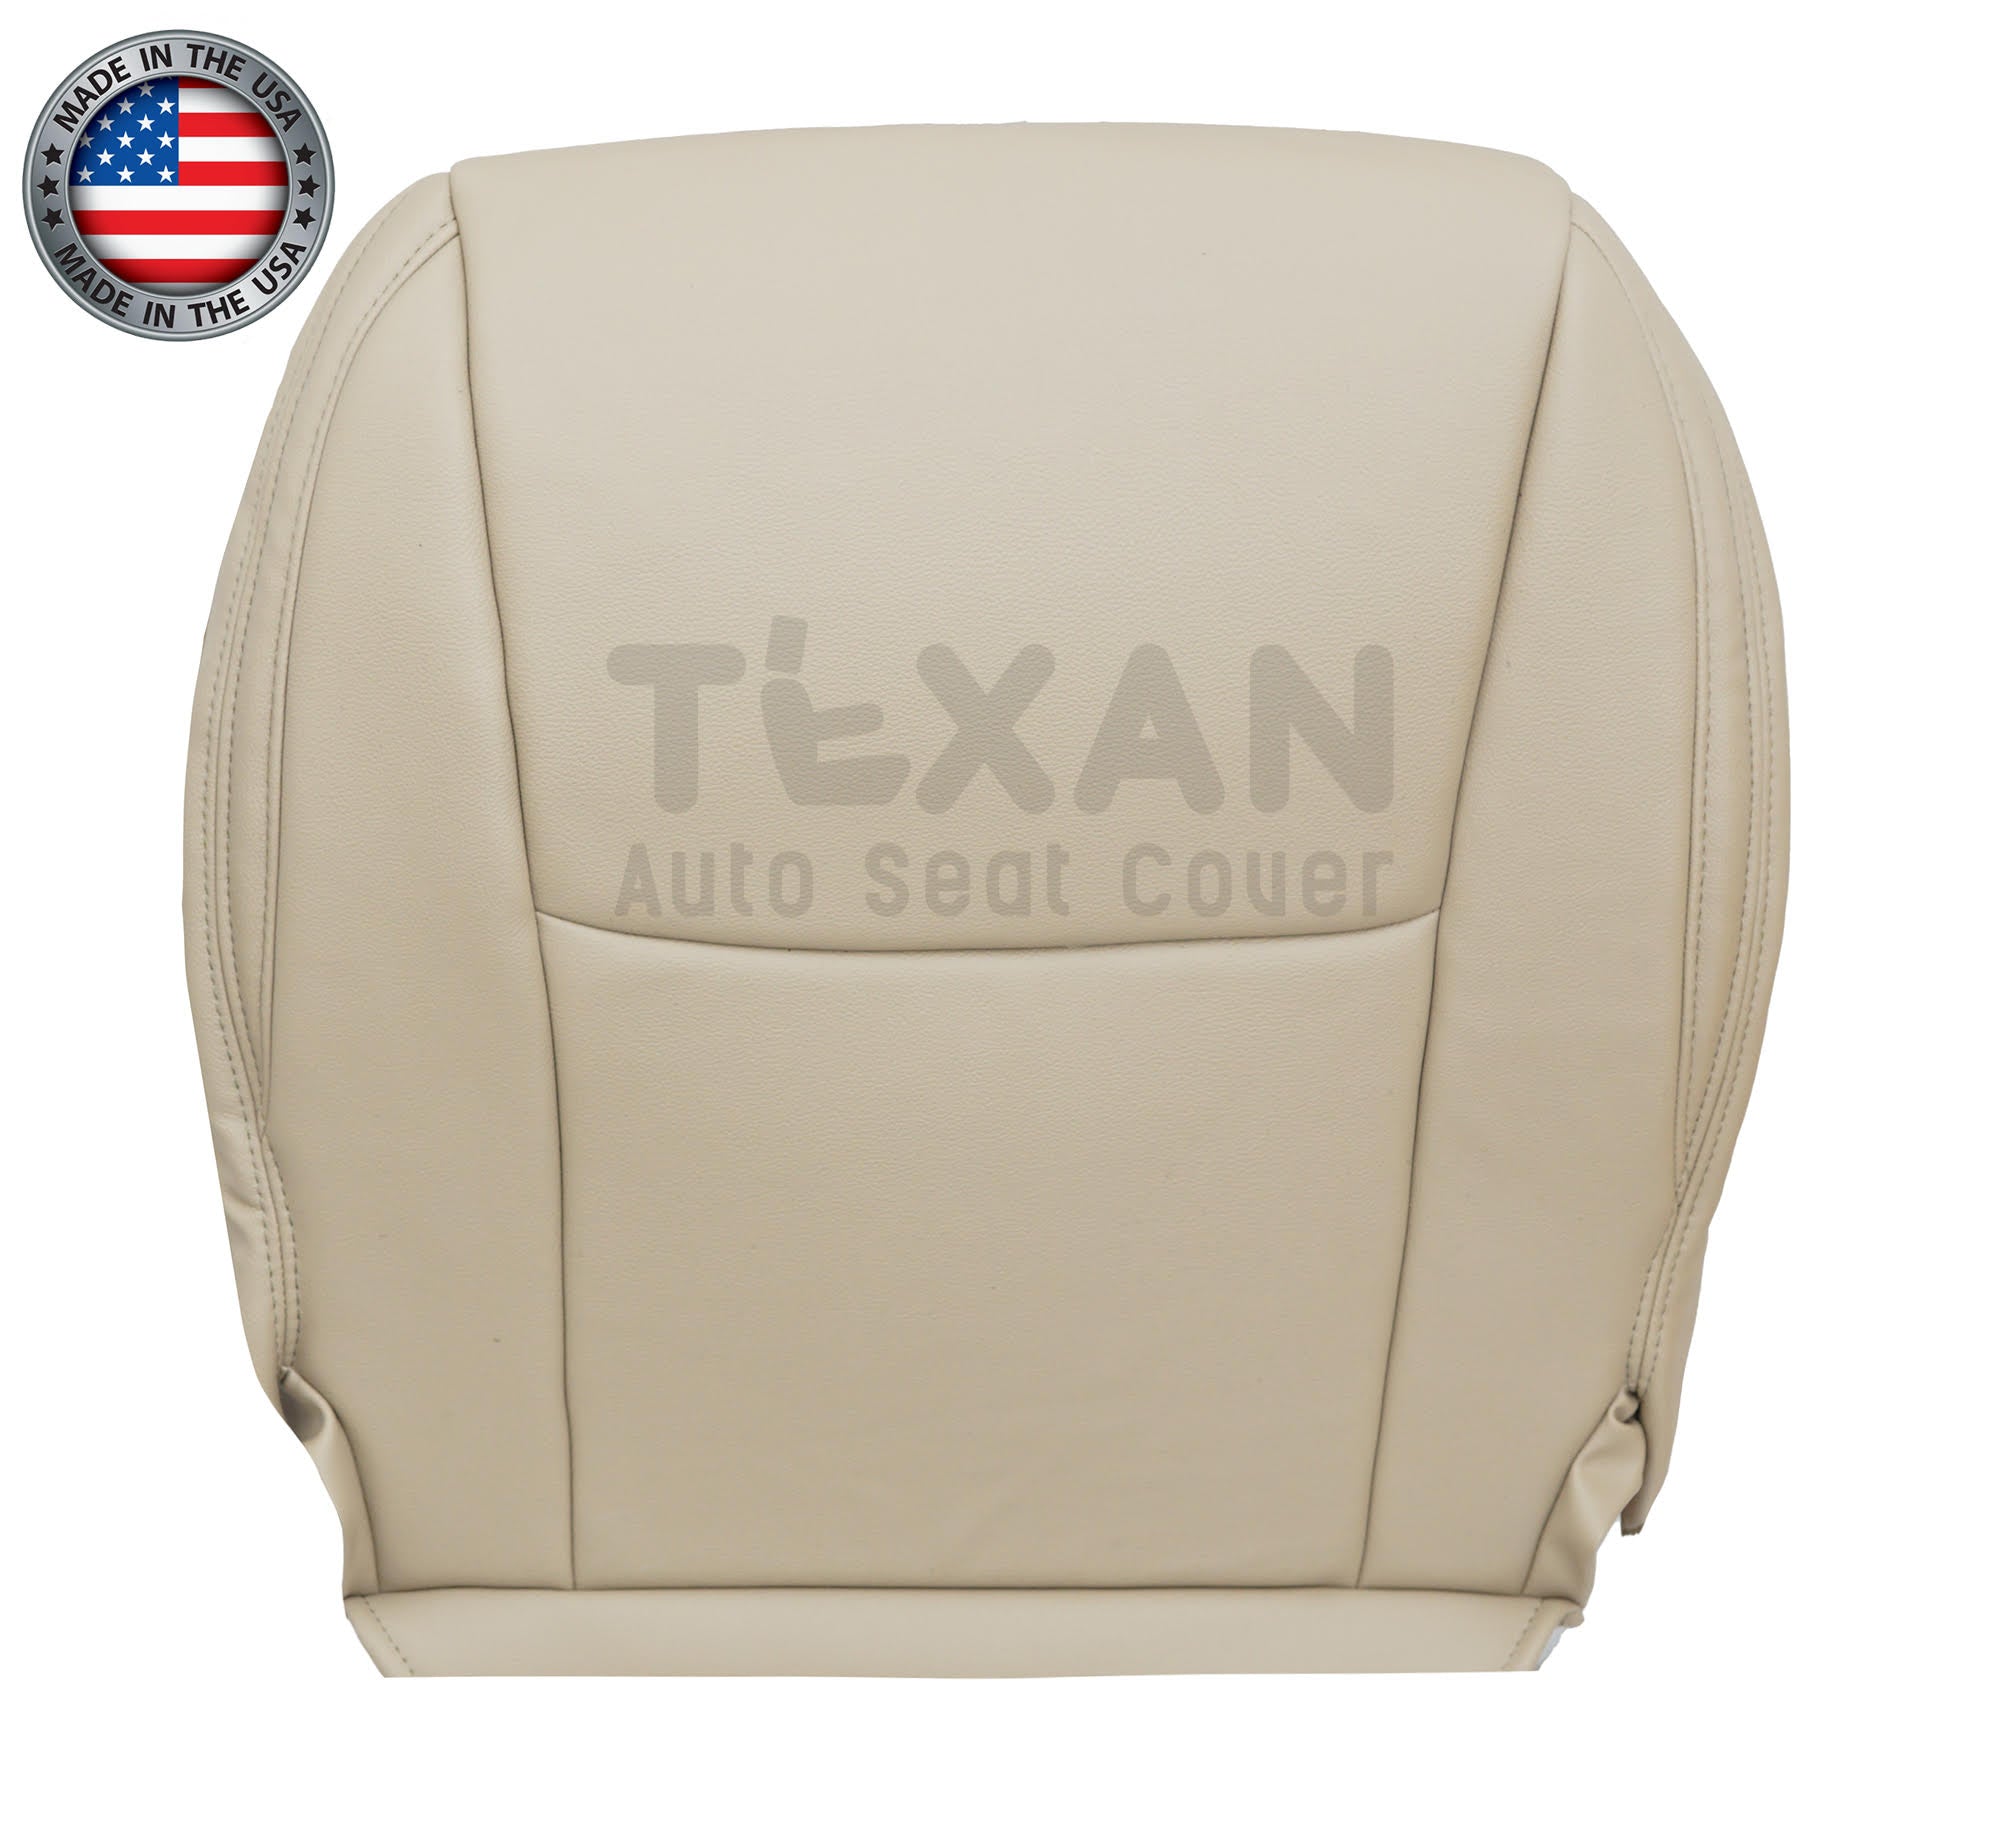 2003, 2004, 2005, 2006, 2007, 2008, 2009 Lexus Gx470 Passenger Side Bottom Leather Replacement Seat Cover Ivory Tan